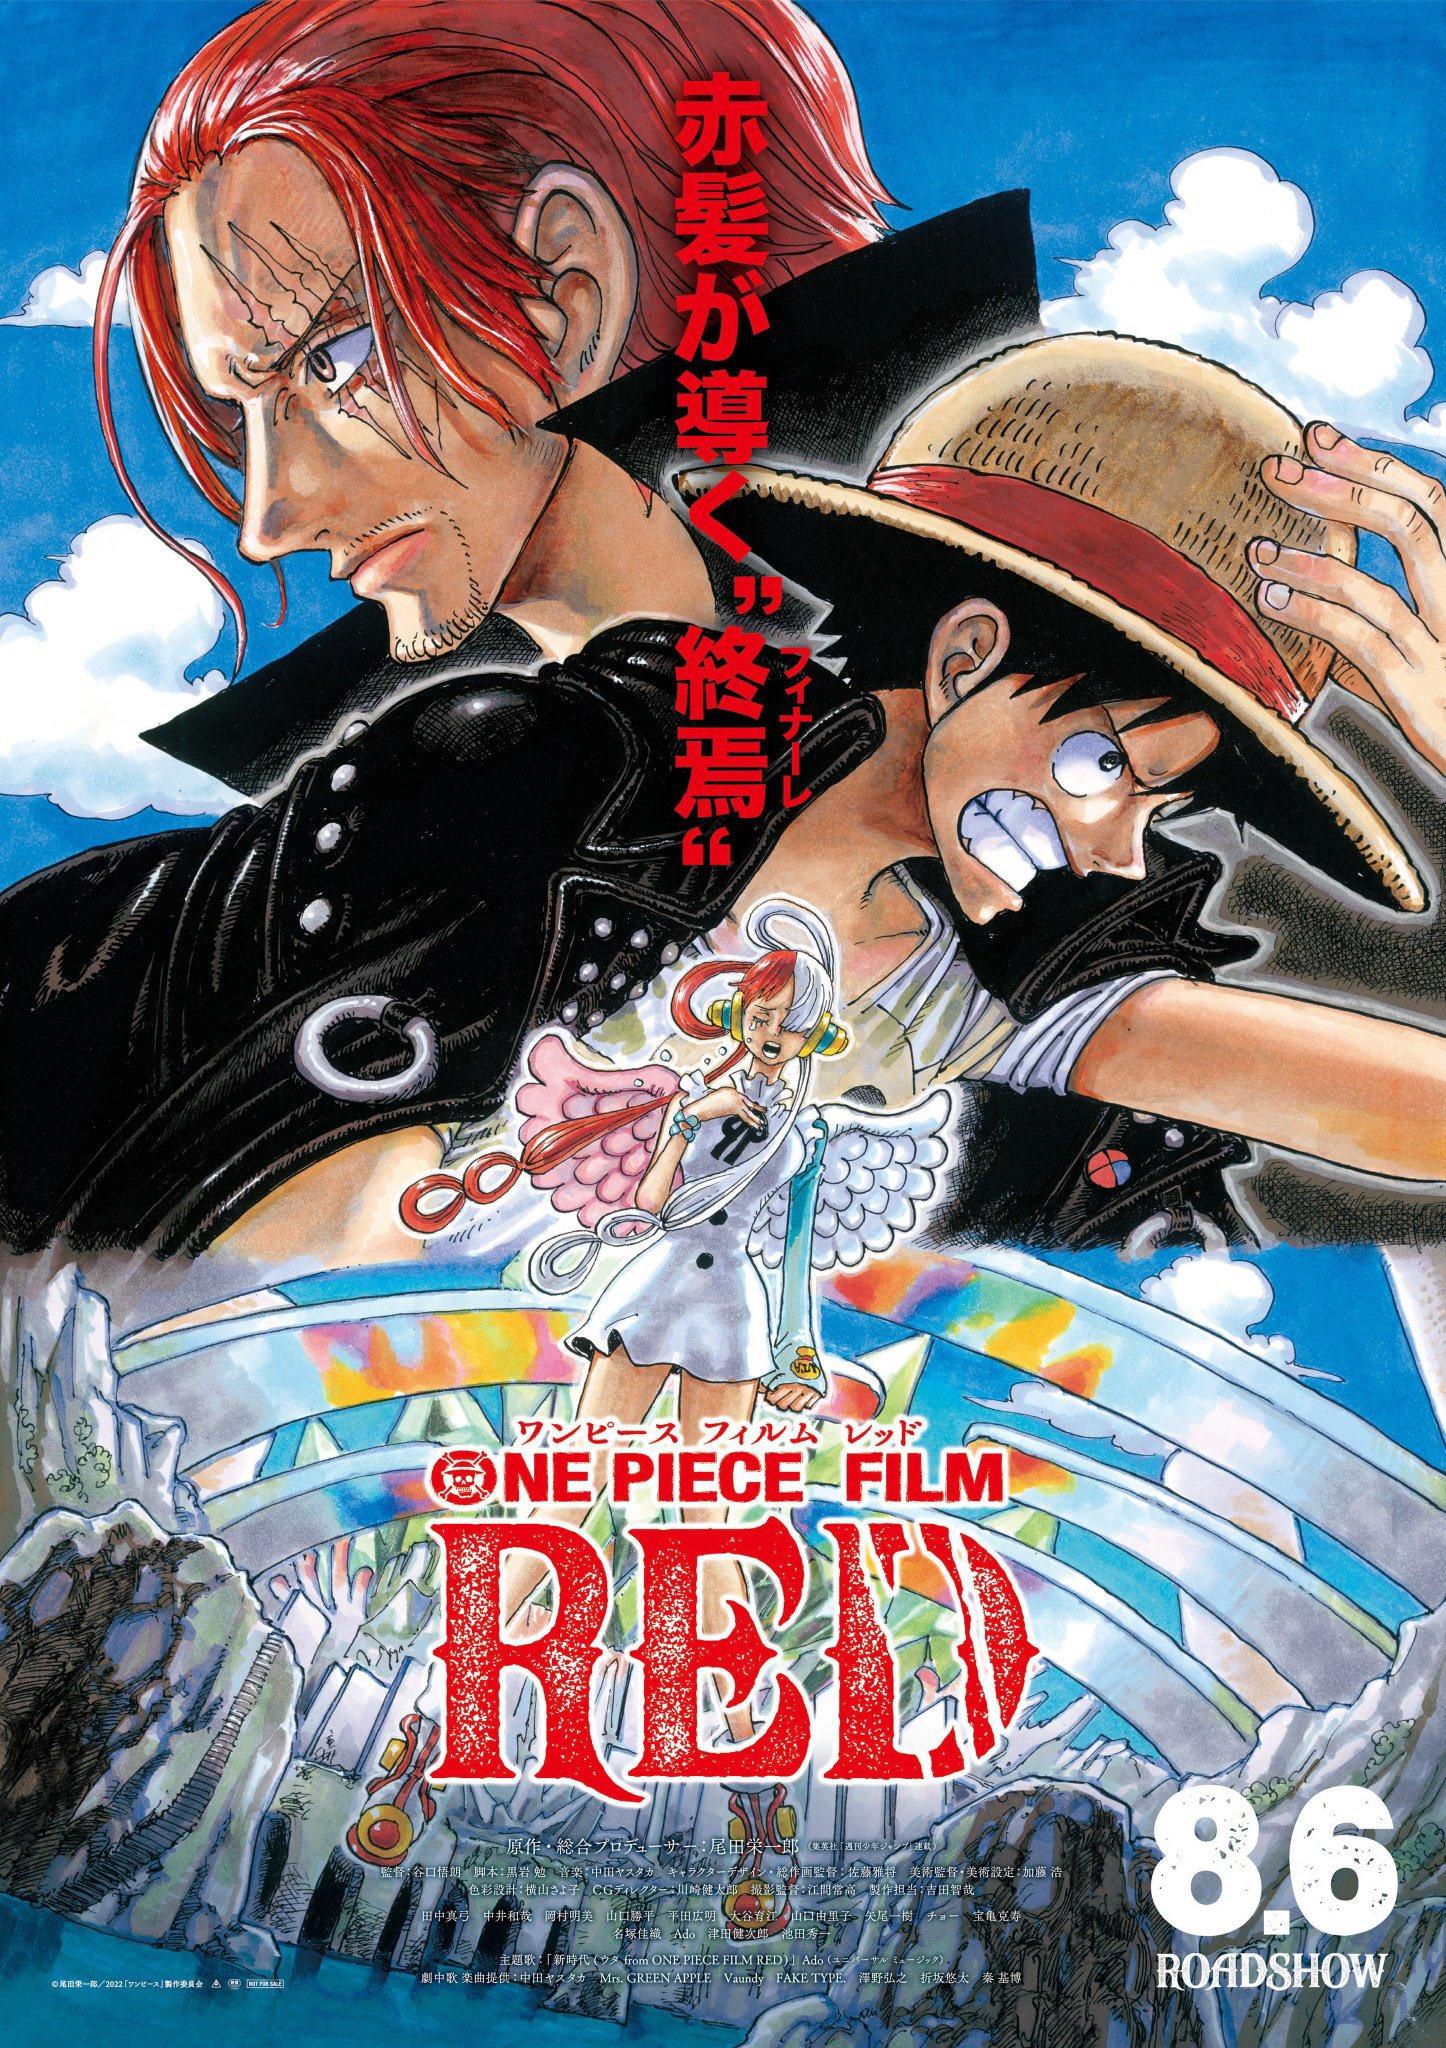 One Piece Ace Op Luffy Fighting Japan Anime Wall Art Home Decor - POSTER  20x30 | eBay